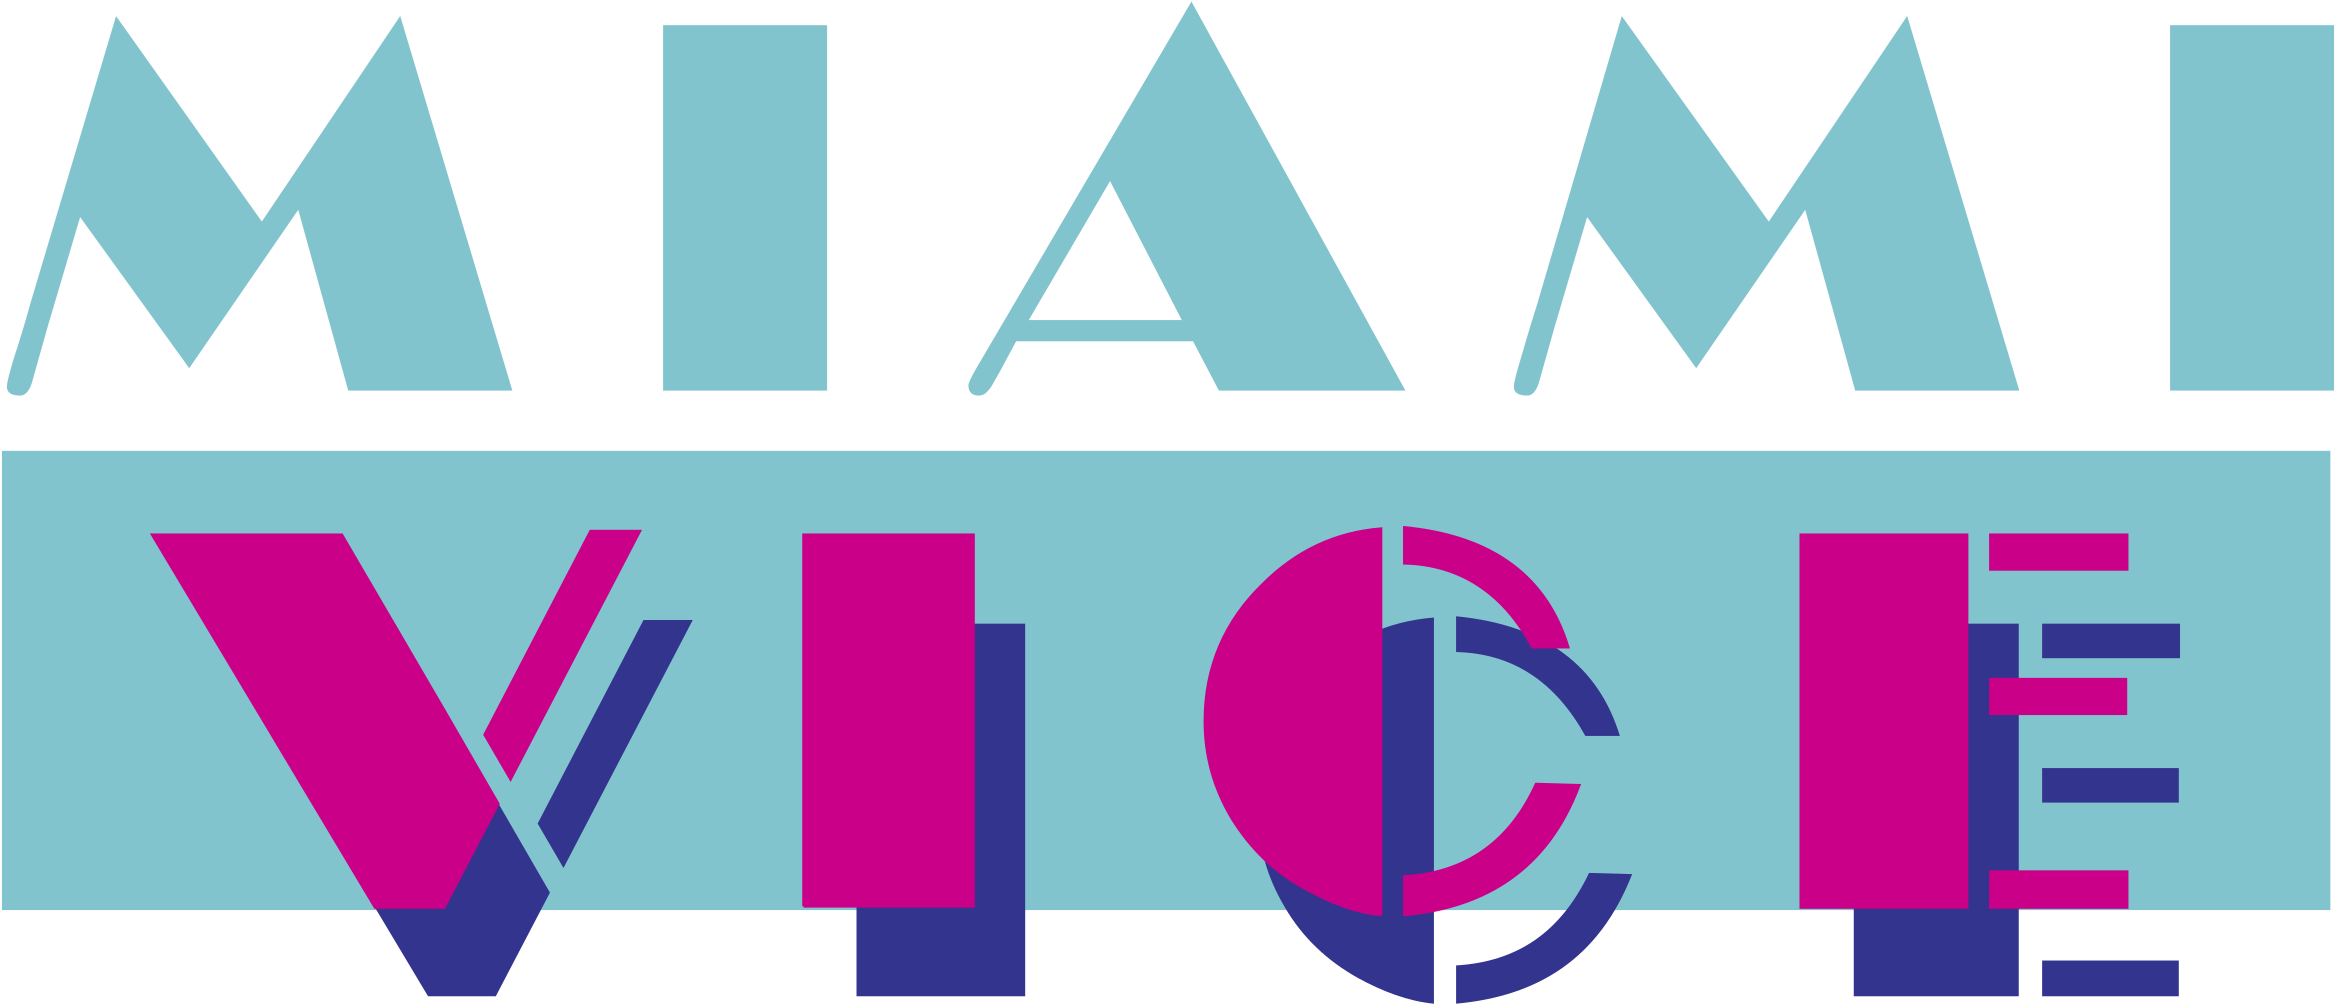 Download Miami Vice Logo Png Transparent - Miami Vice Logo PNG Image with No Background - PNGkey.com